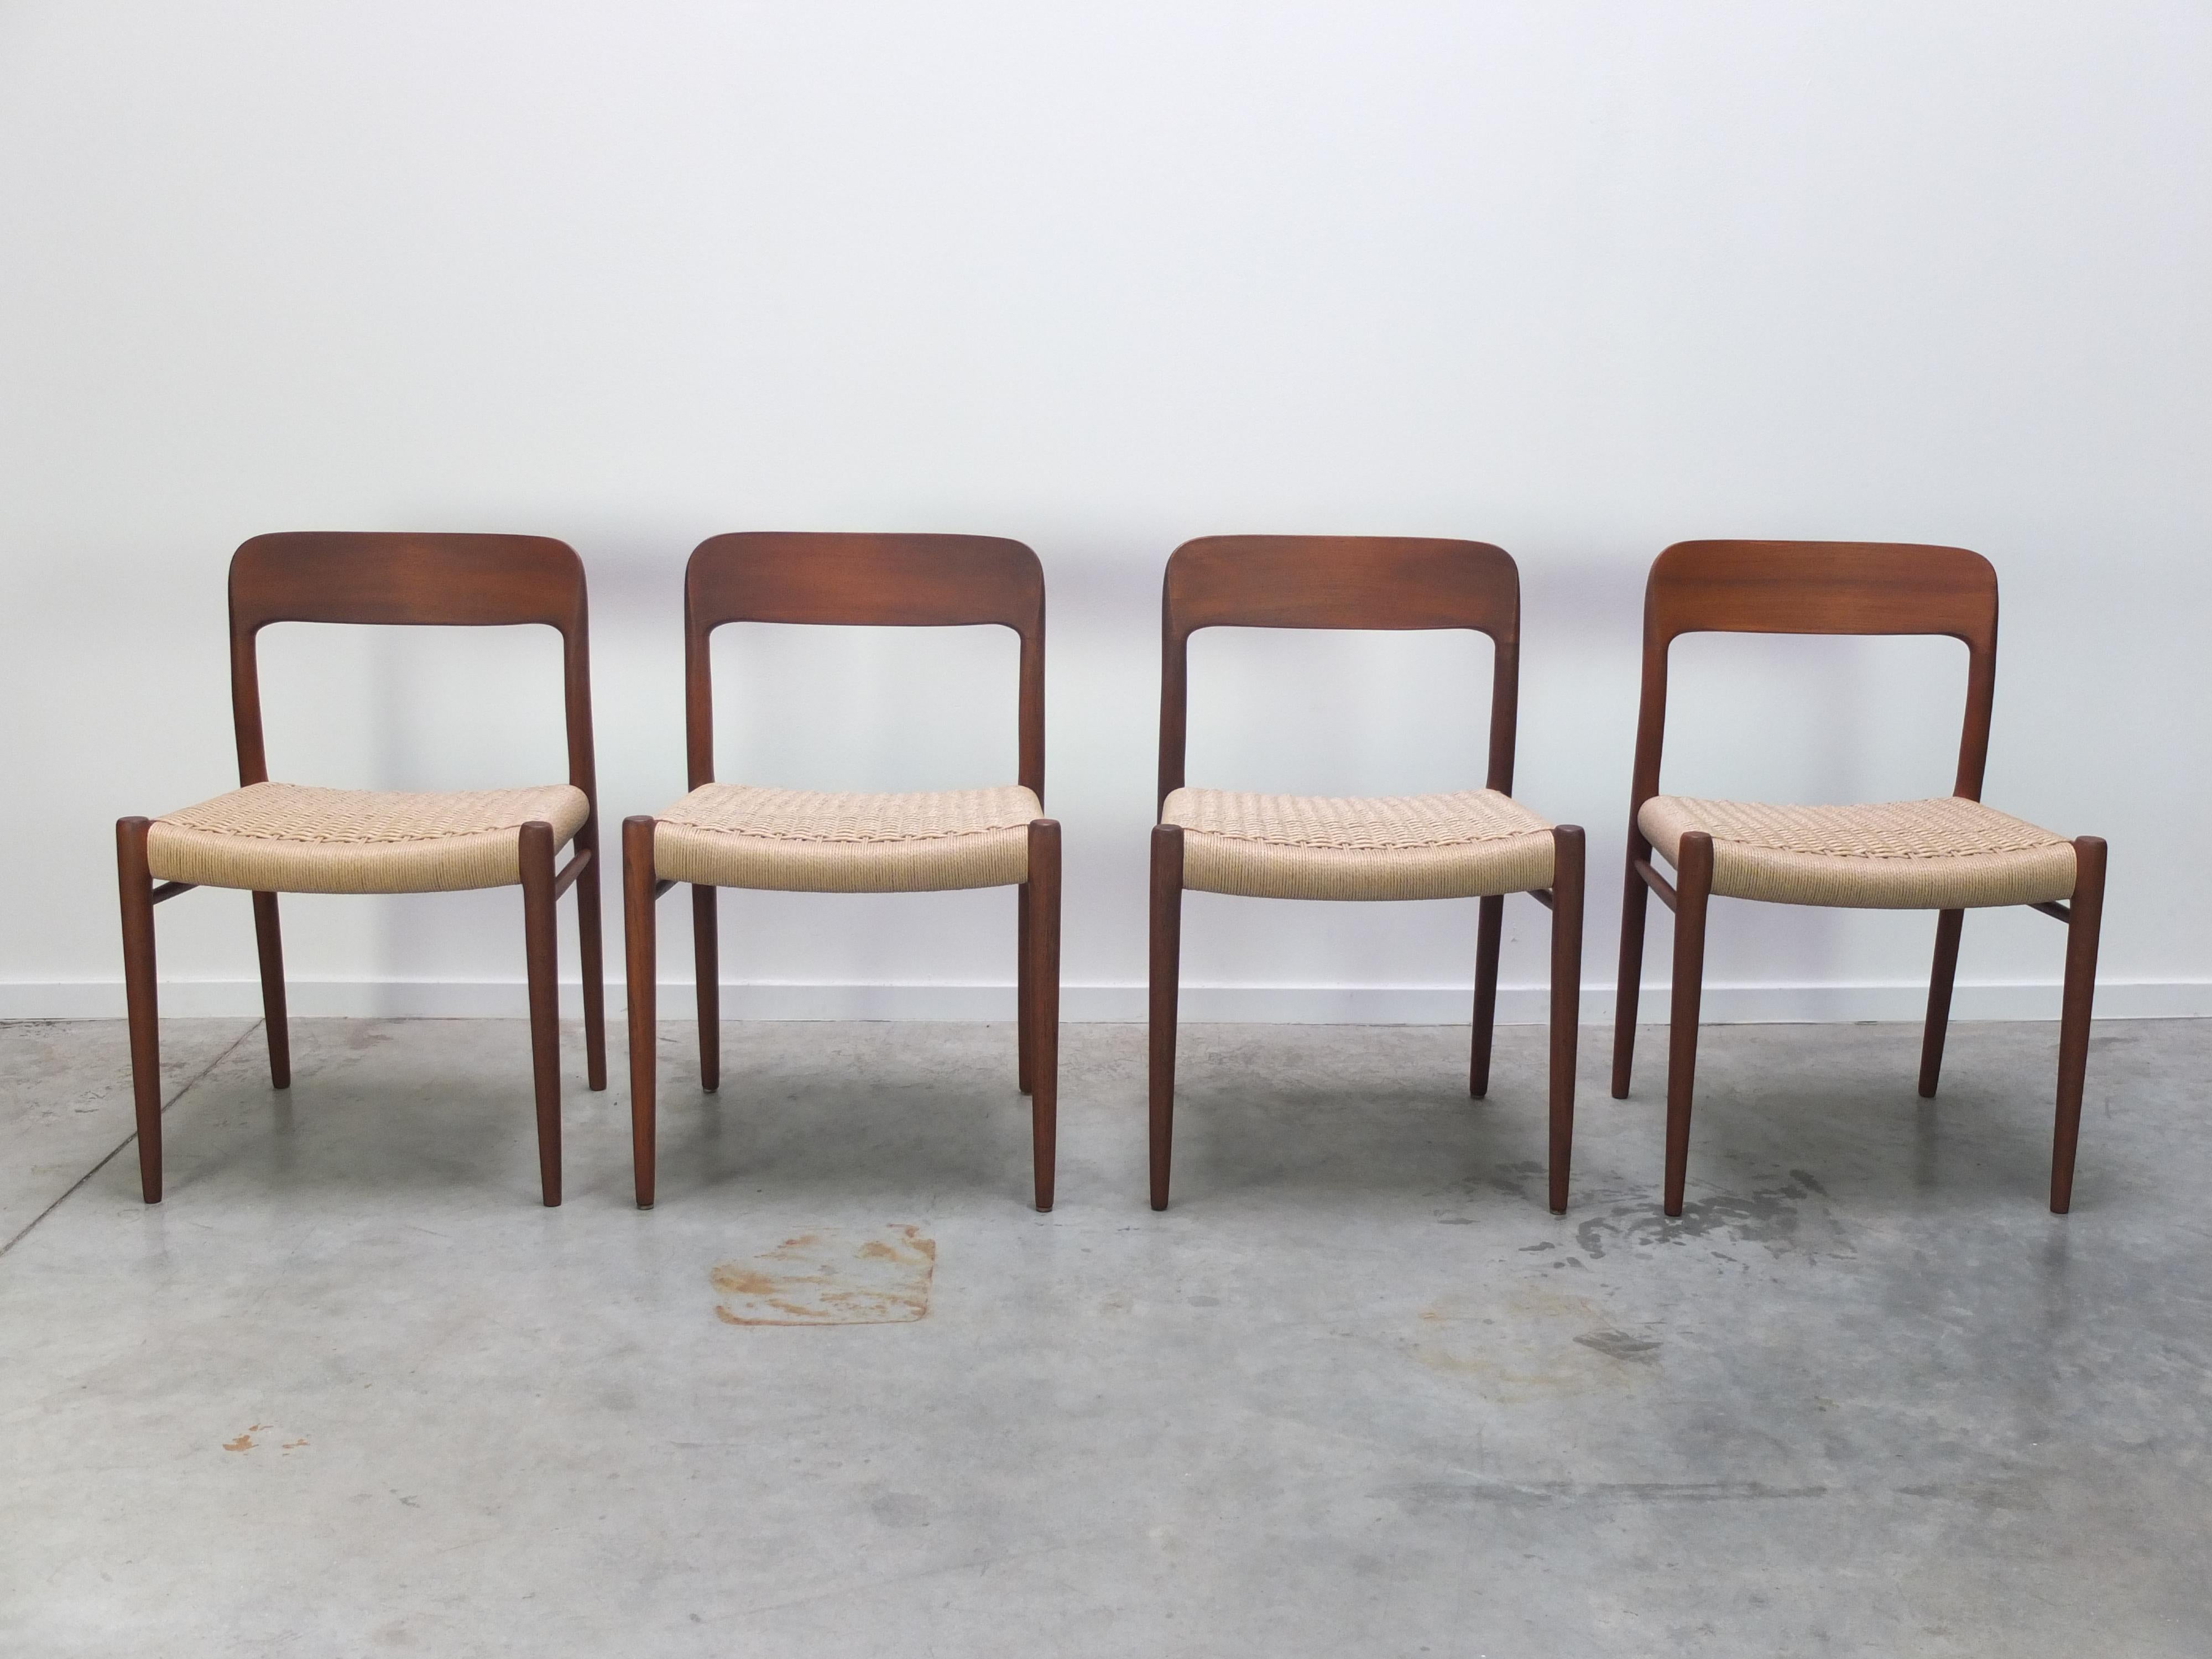 Set of 4 ‘Model 75’ dining chairs designed by famous Danish chair designer Niels O. Møller in the 1960s. These chairs are made of a beautiful solid teak wood frame with fully renewed papercord seatings. Produced by J.L. Møllers Møbelfabrik in